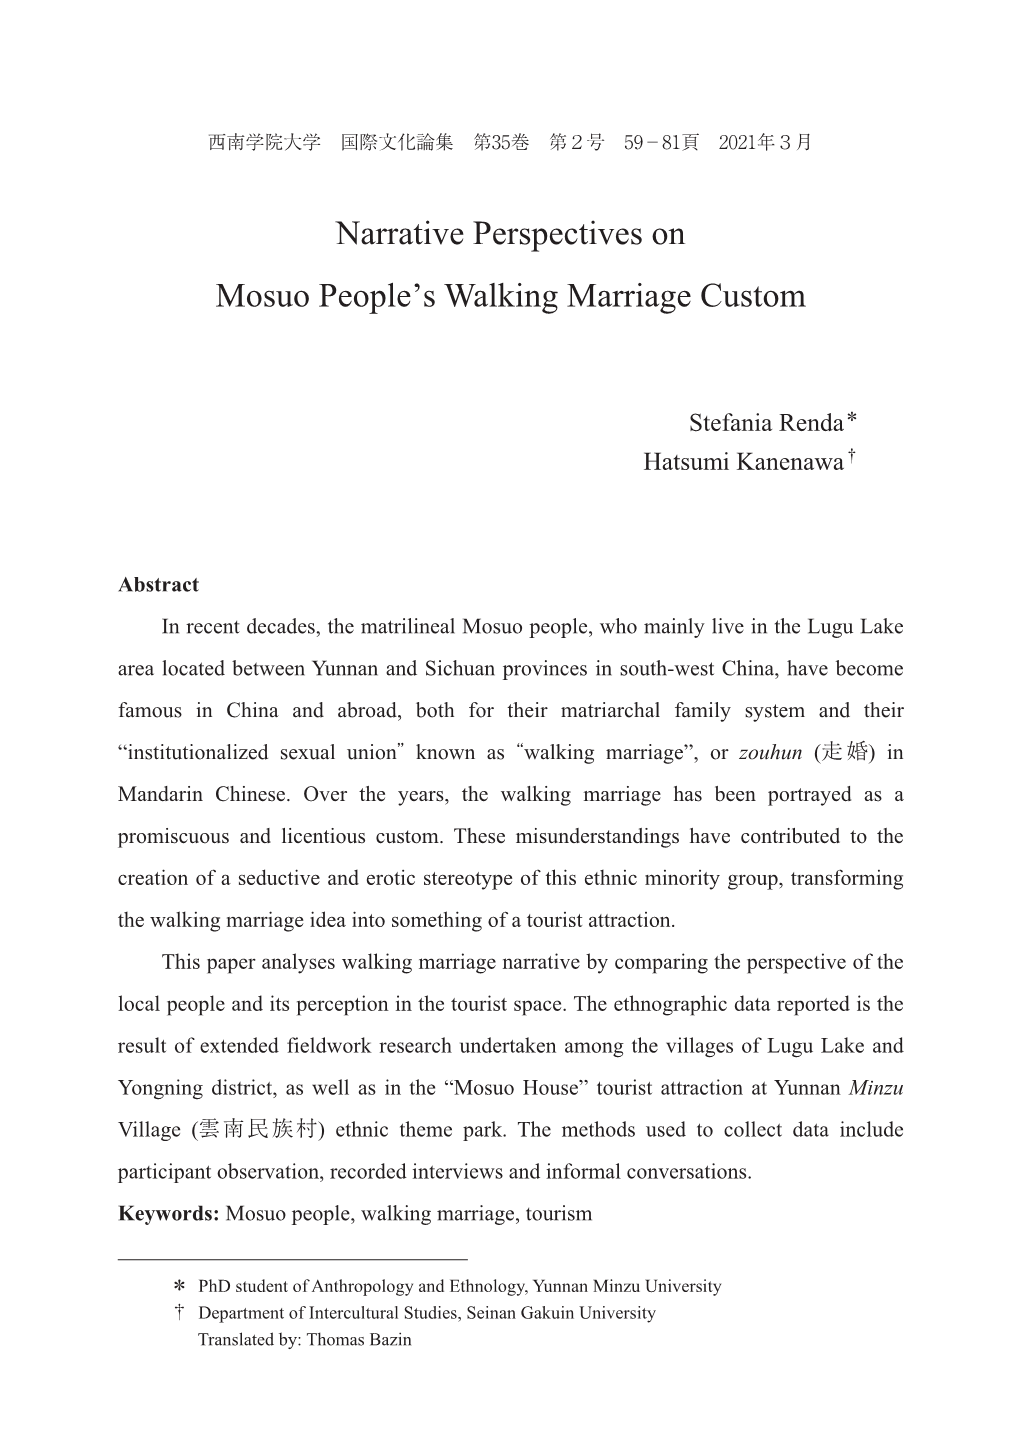 Narrative Perspectives on Mosuo People's Walking Marriage Custom